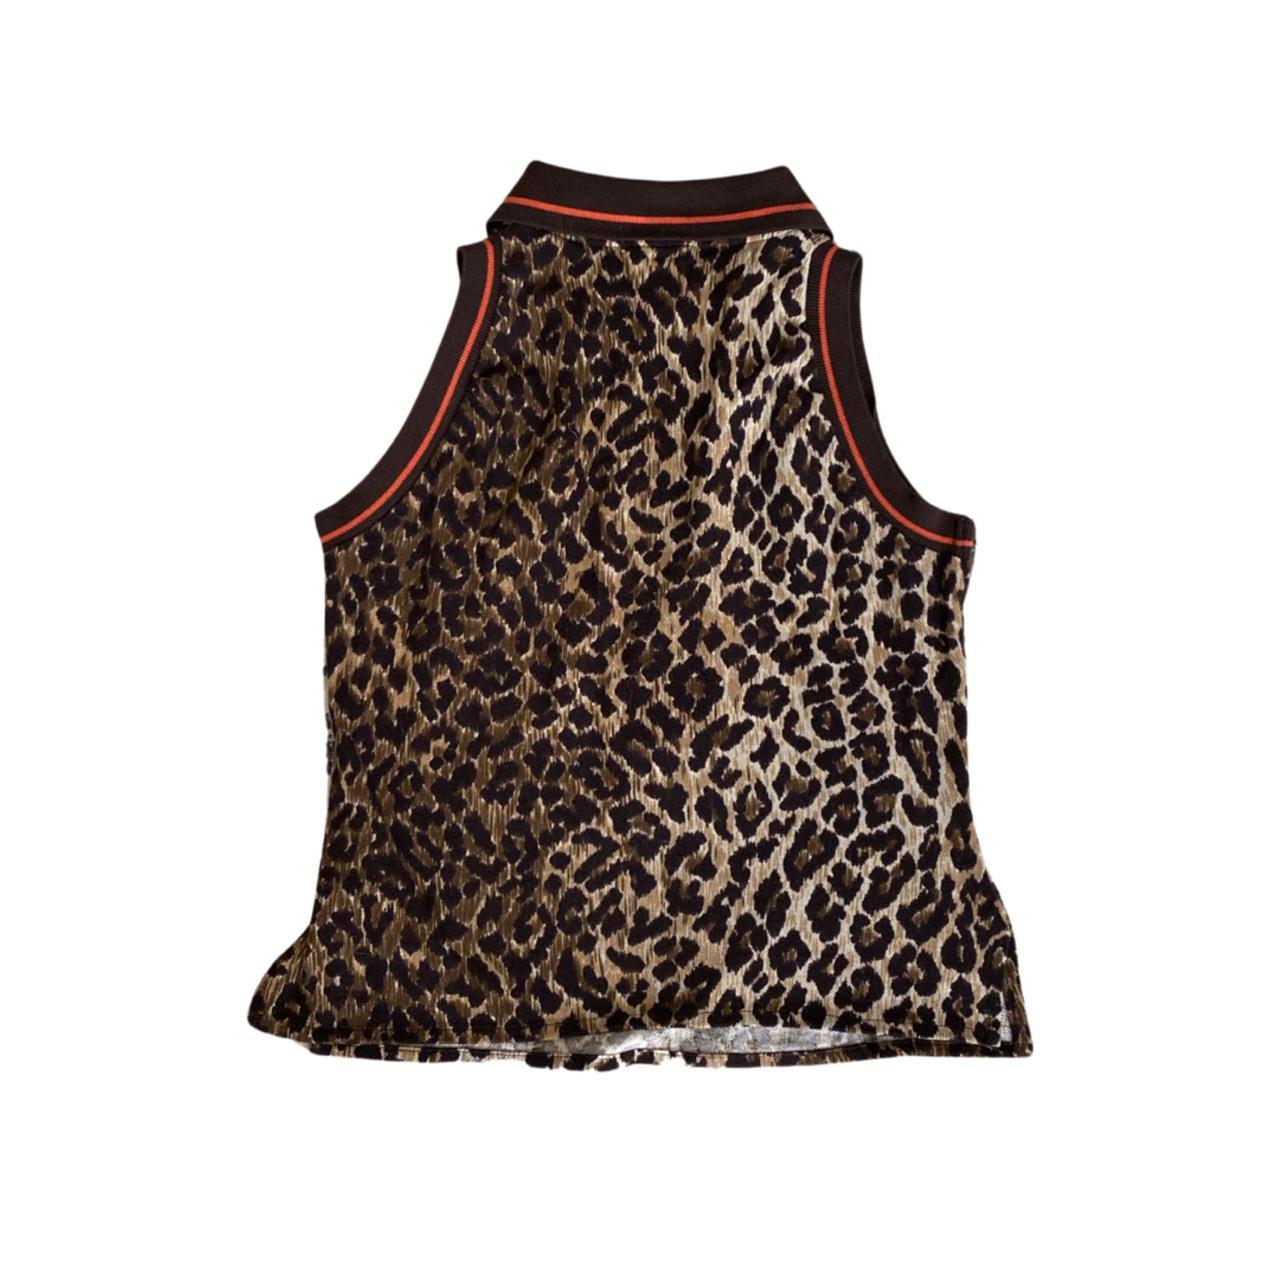 Dolce & Gabbana Women's Brown and Red Bodysuit (2)